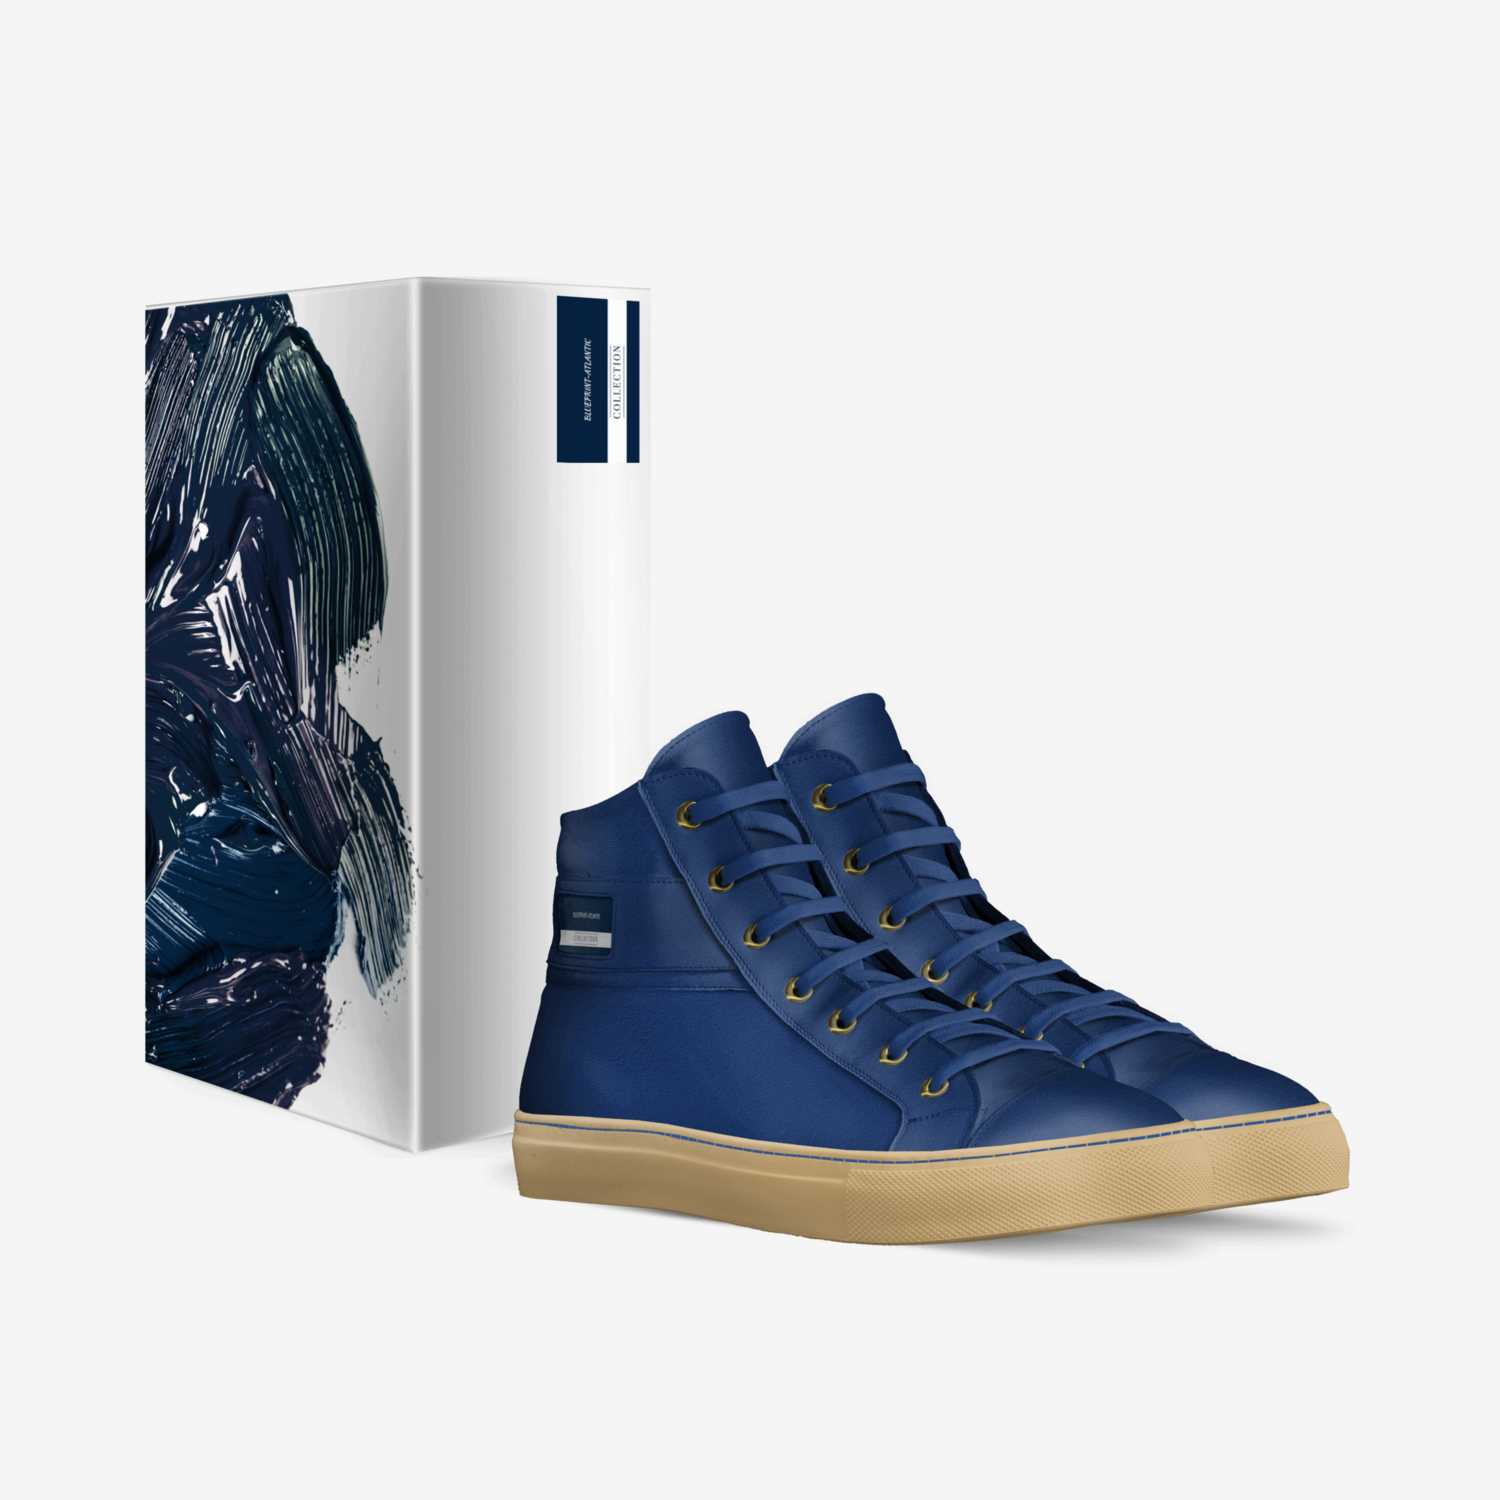 BLUEPRINT-ATLANTIC custom made in Italy shoes by Fresh Fit Focused | Box view